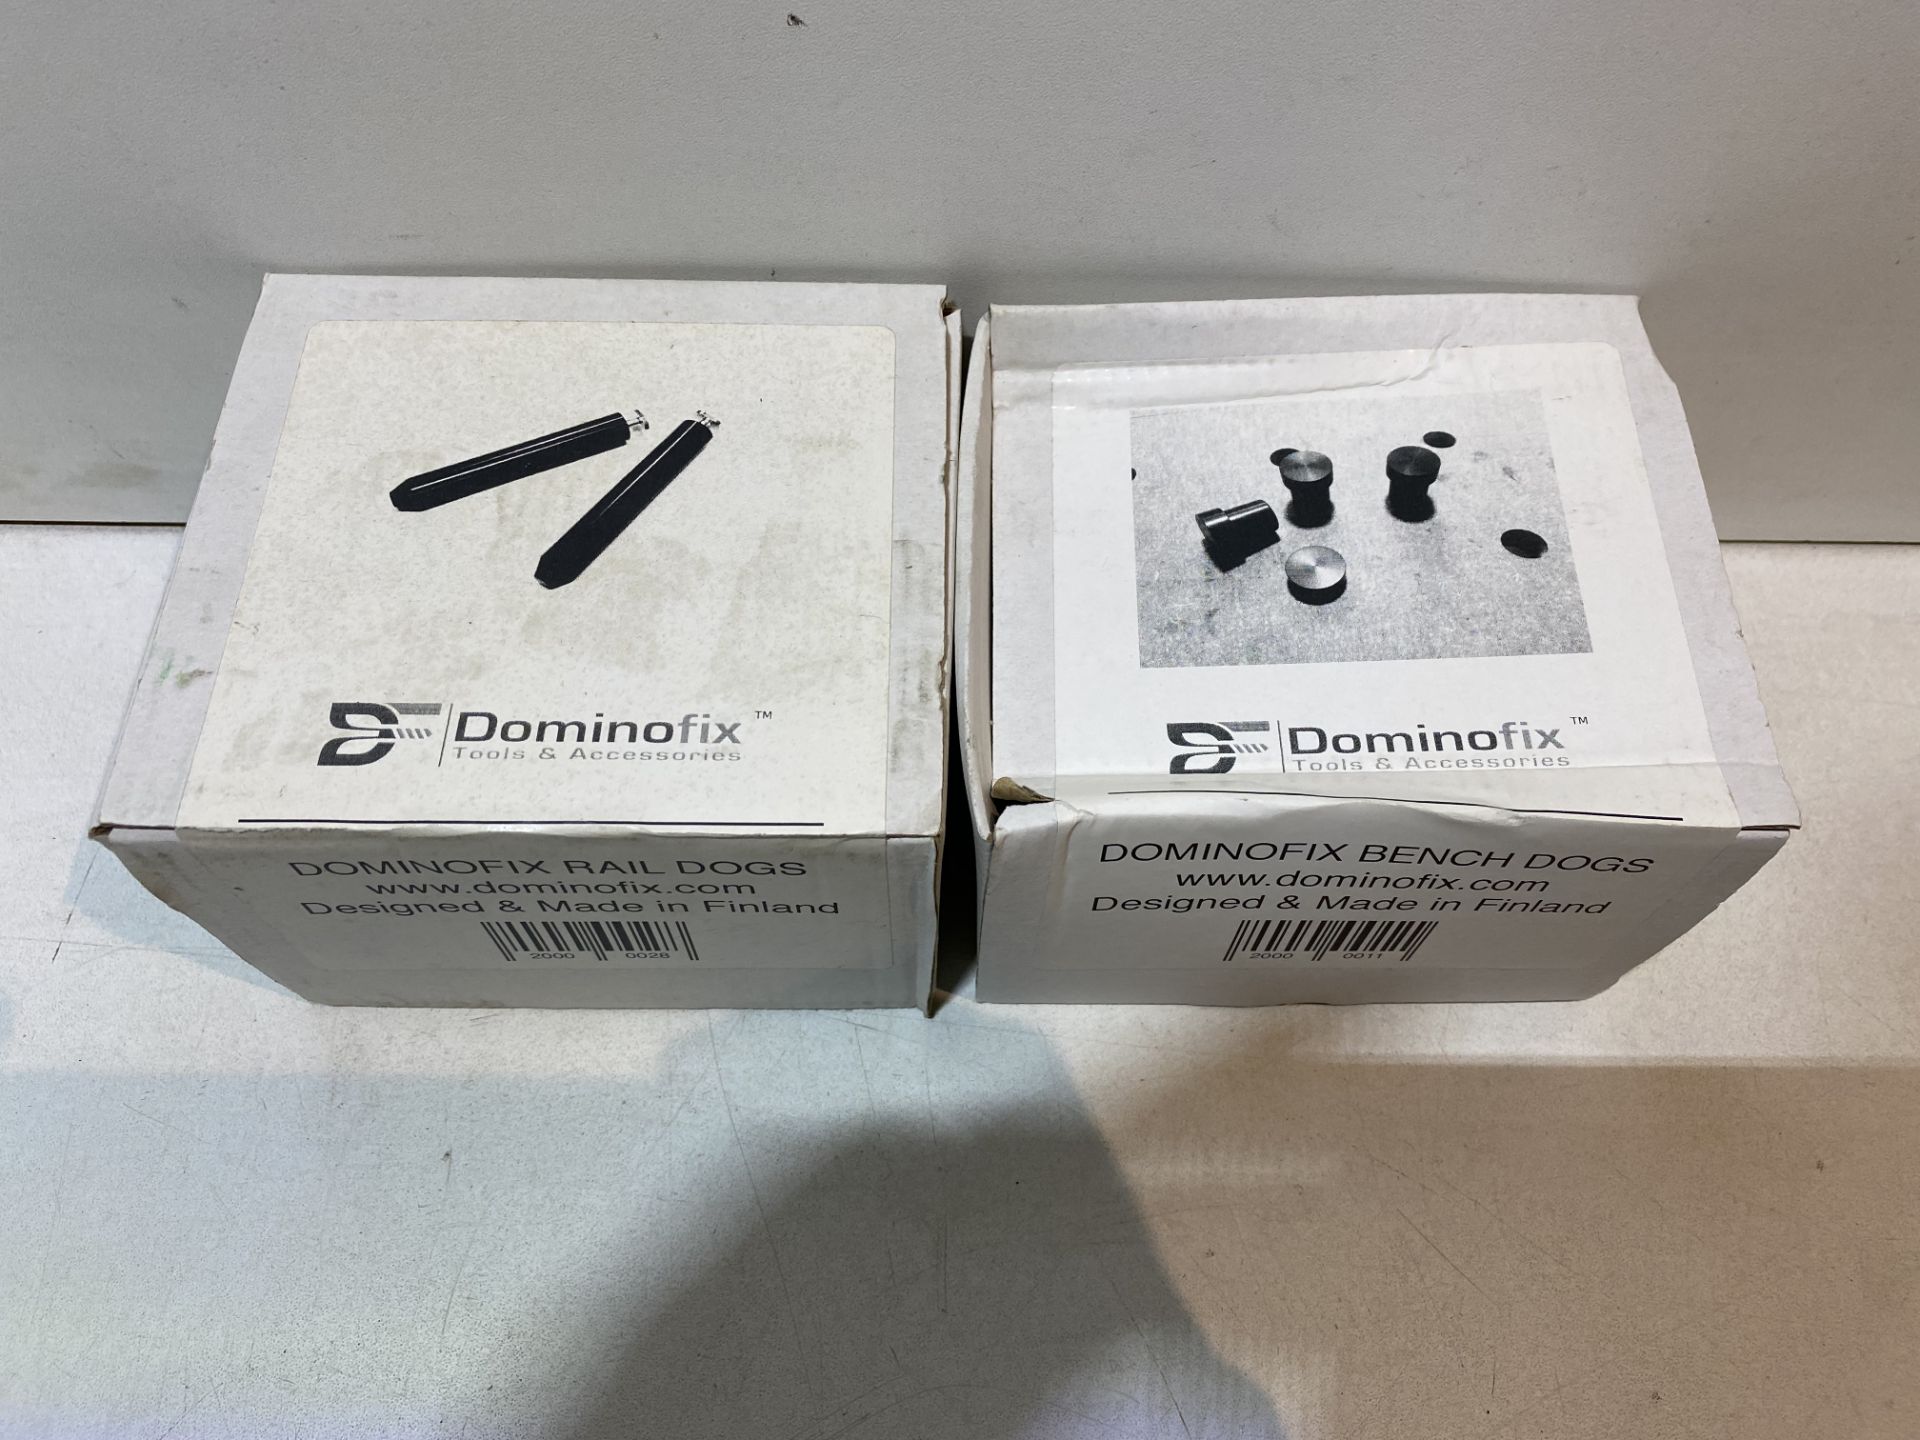 Quantity Of Dominofix Rail Dogs & Bench Dogs